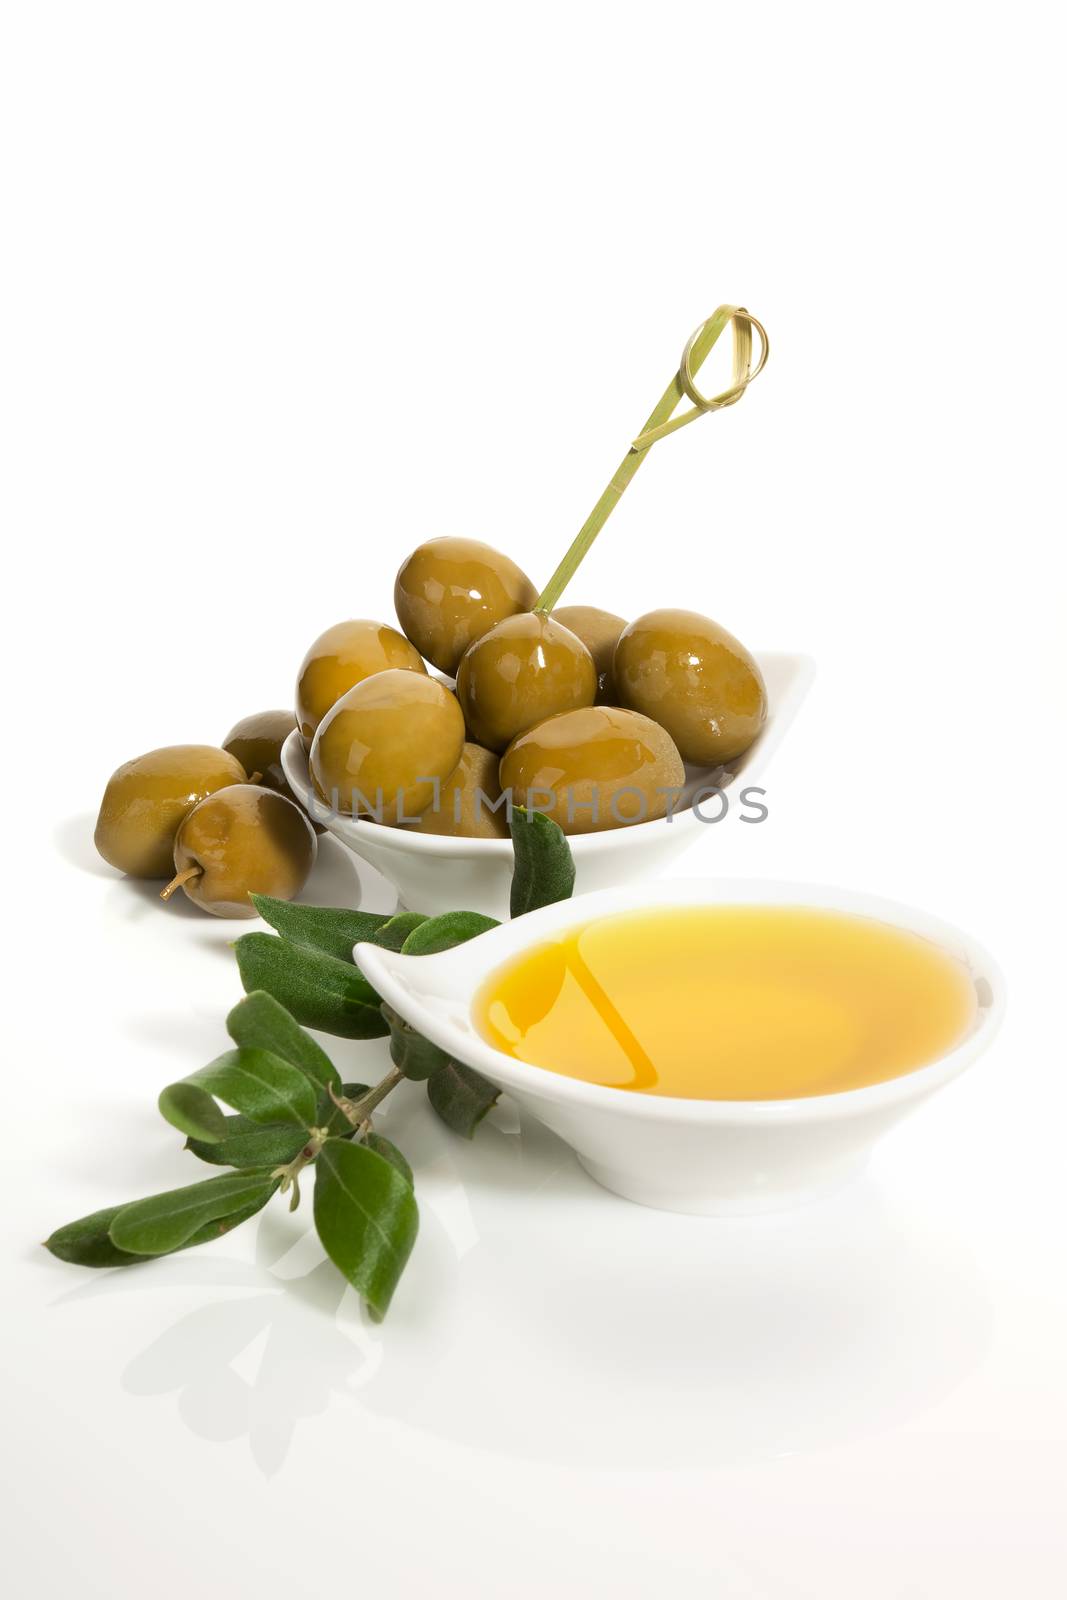 Green olives and extra virgin oliver oil with olive twig isolated on white background. Traditional olive background.